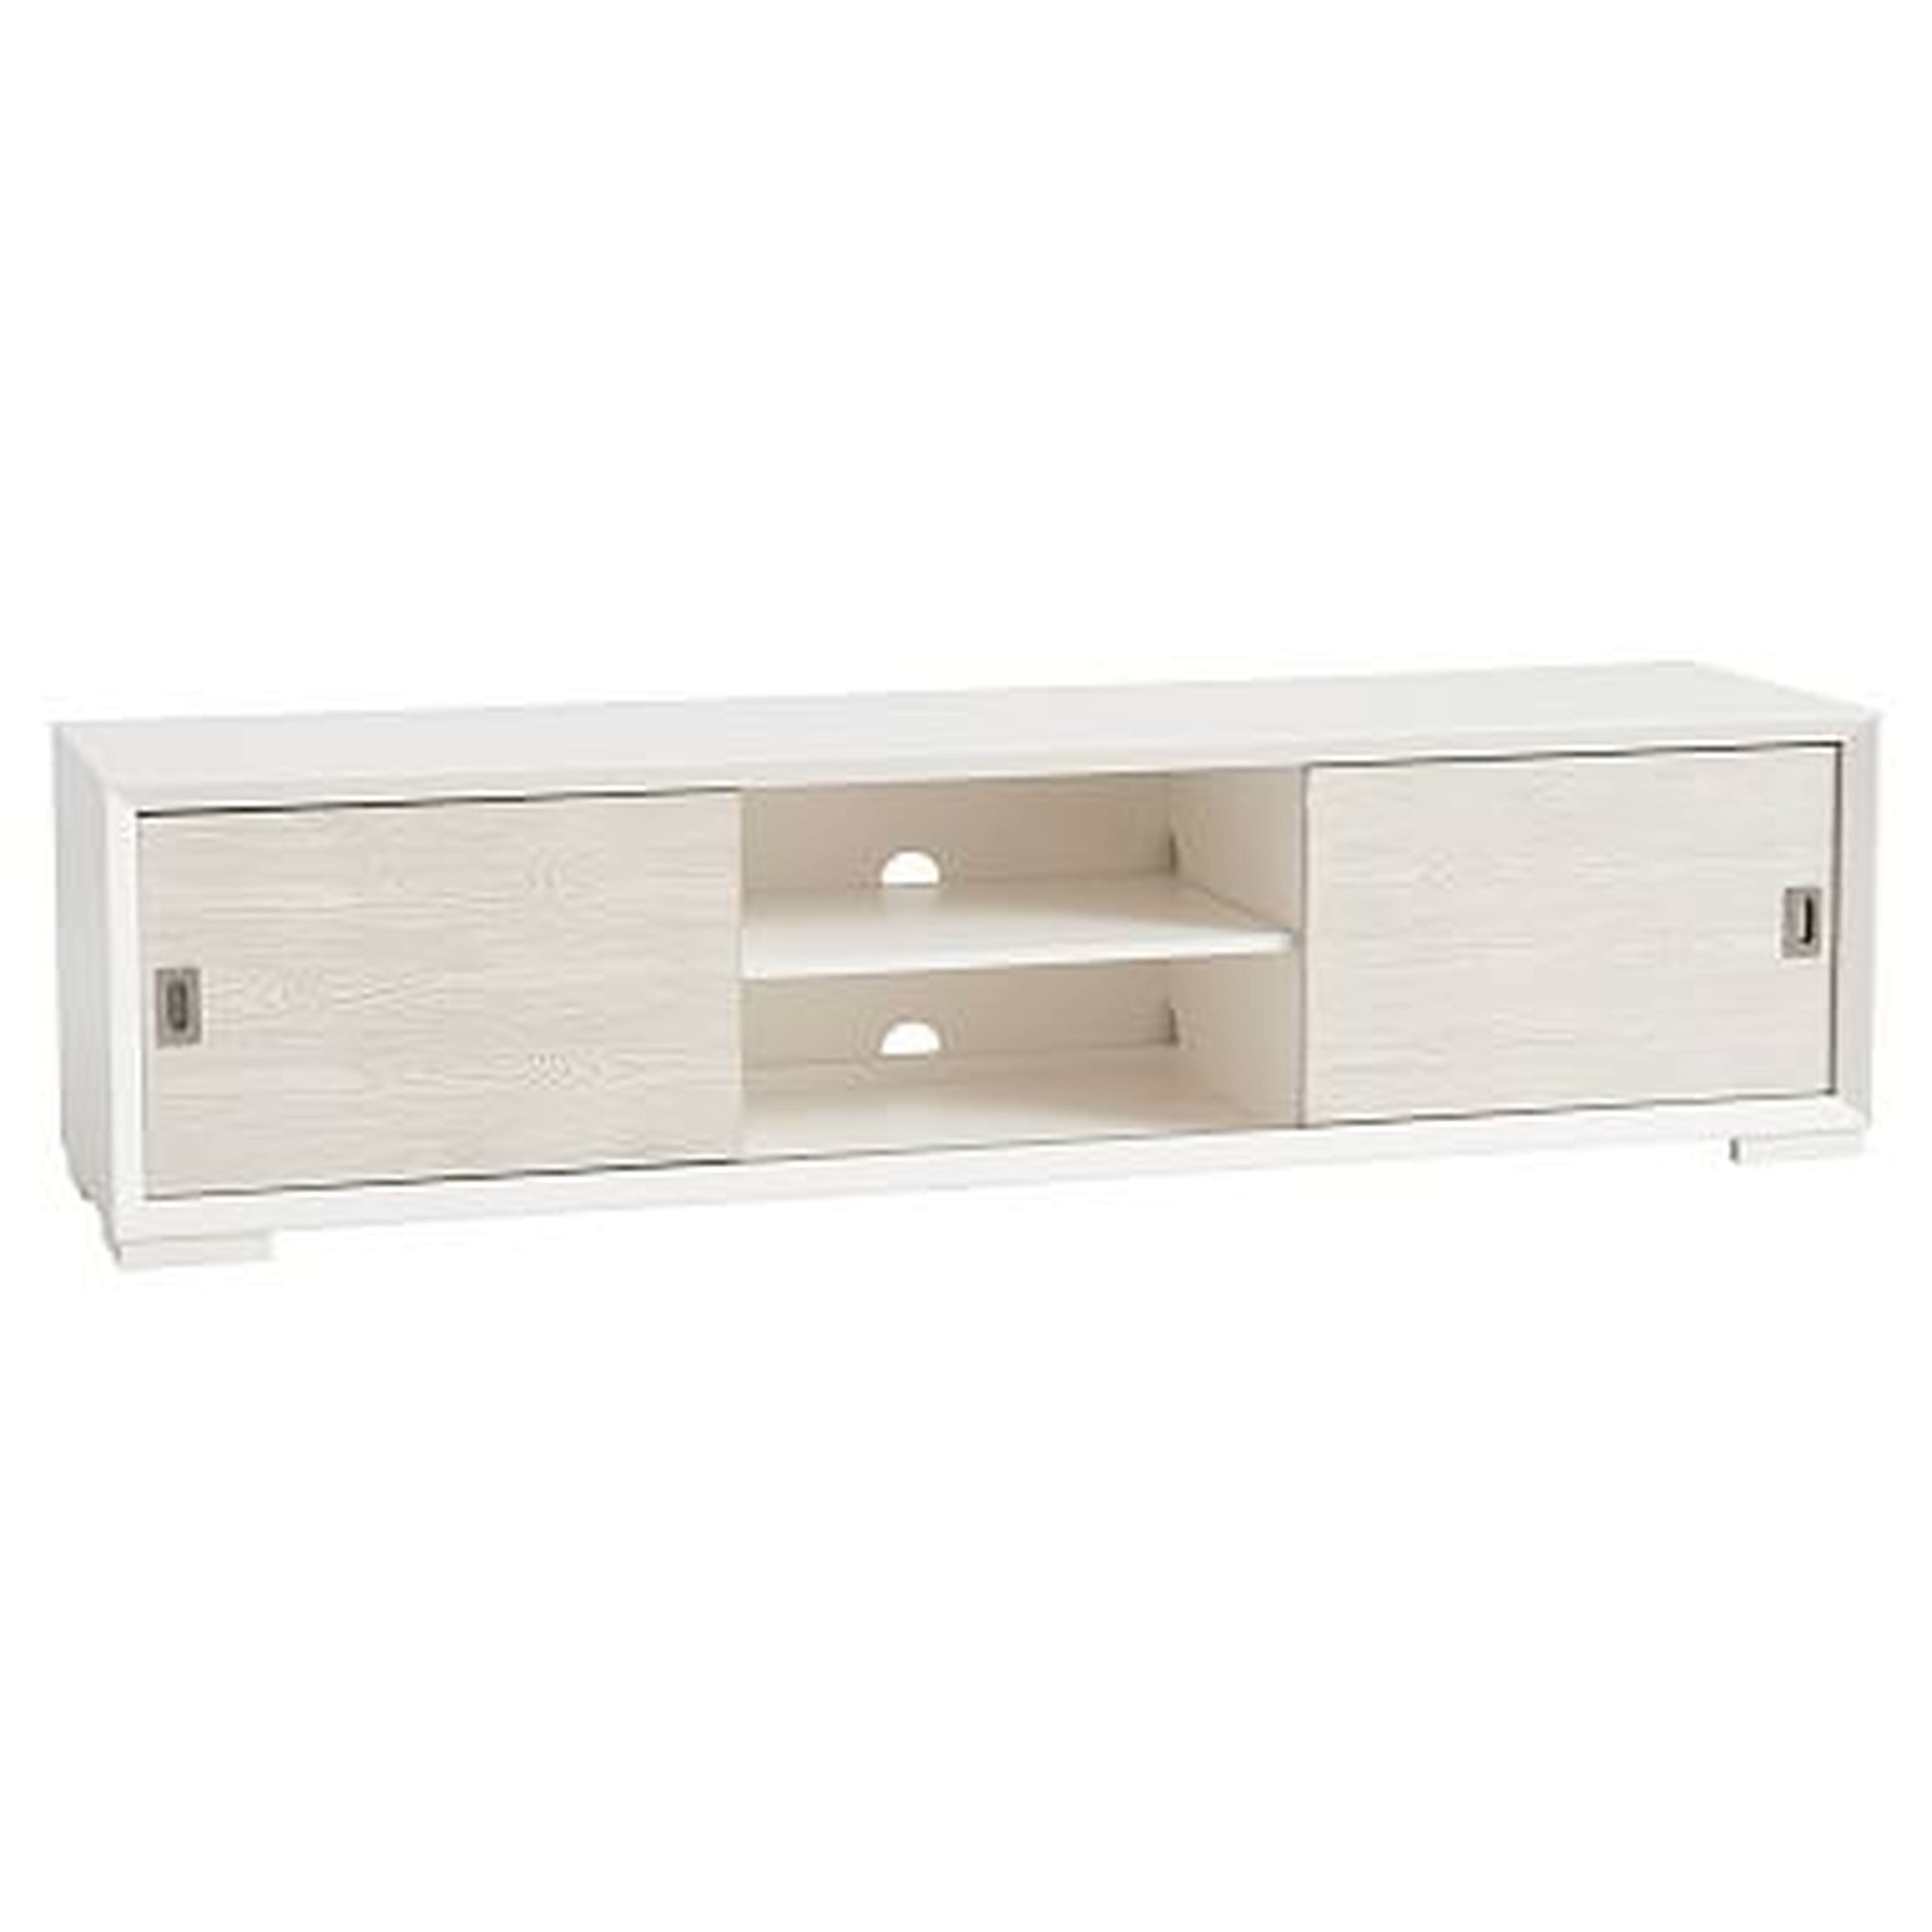 Callum Media Console, Water-Based Simply White/ Weathered White - Pottery Barn Teen